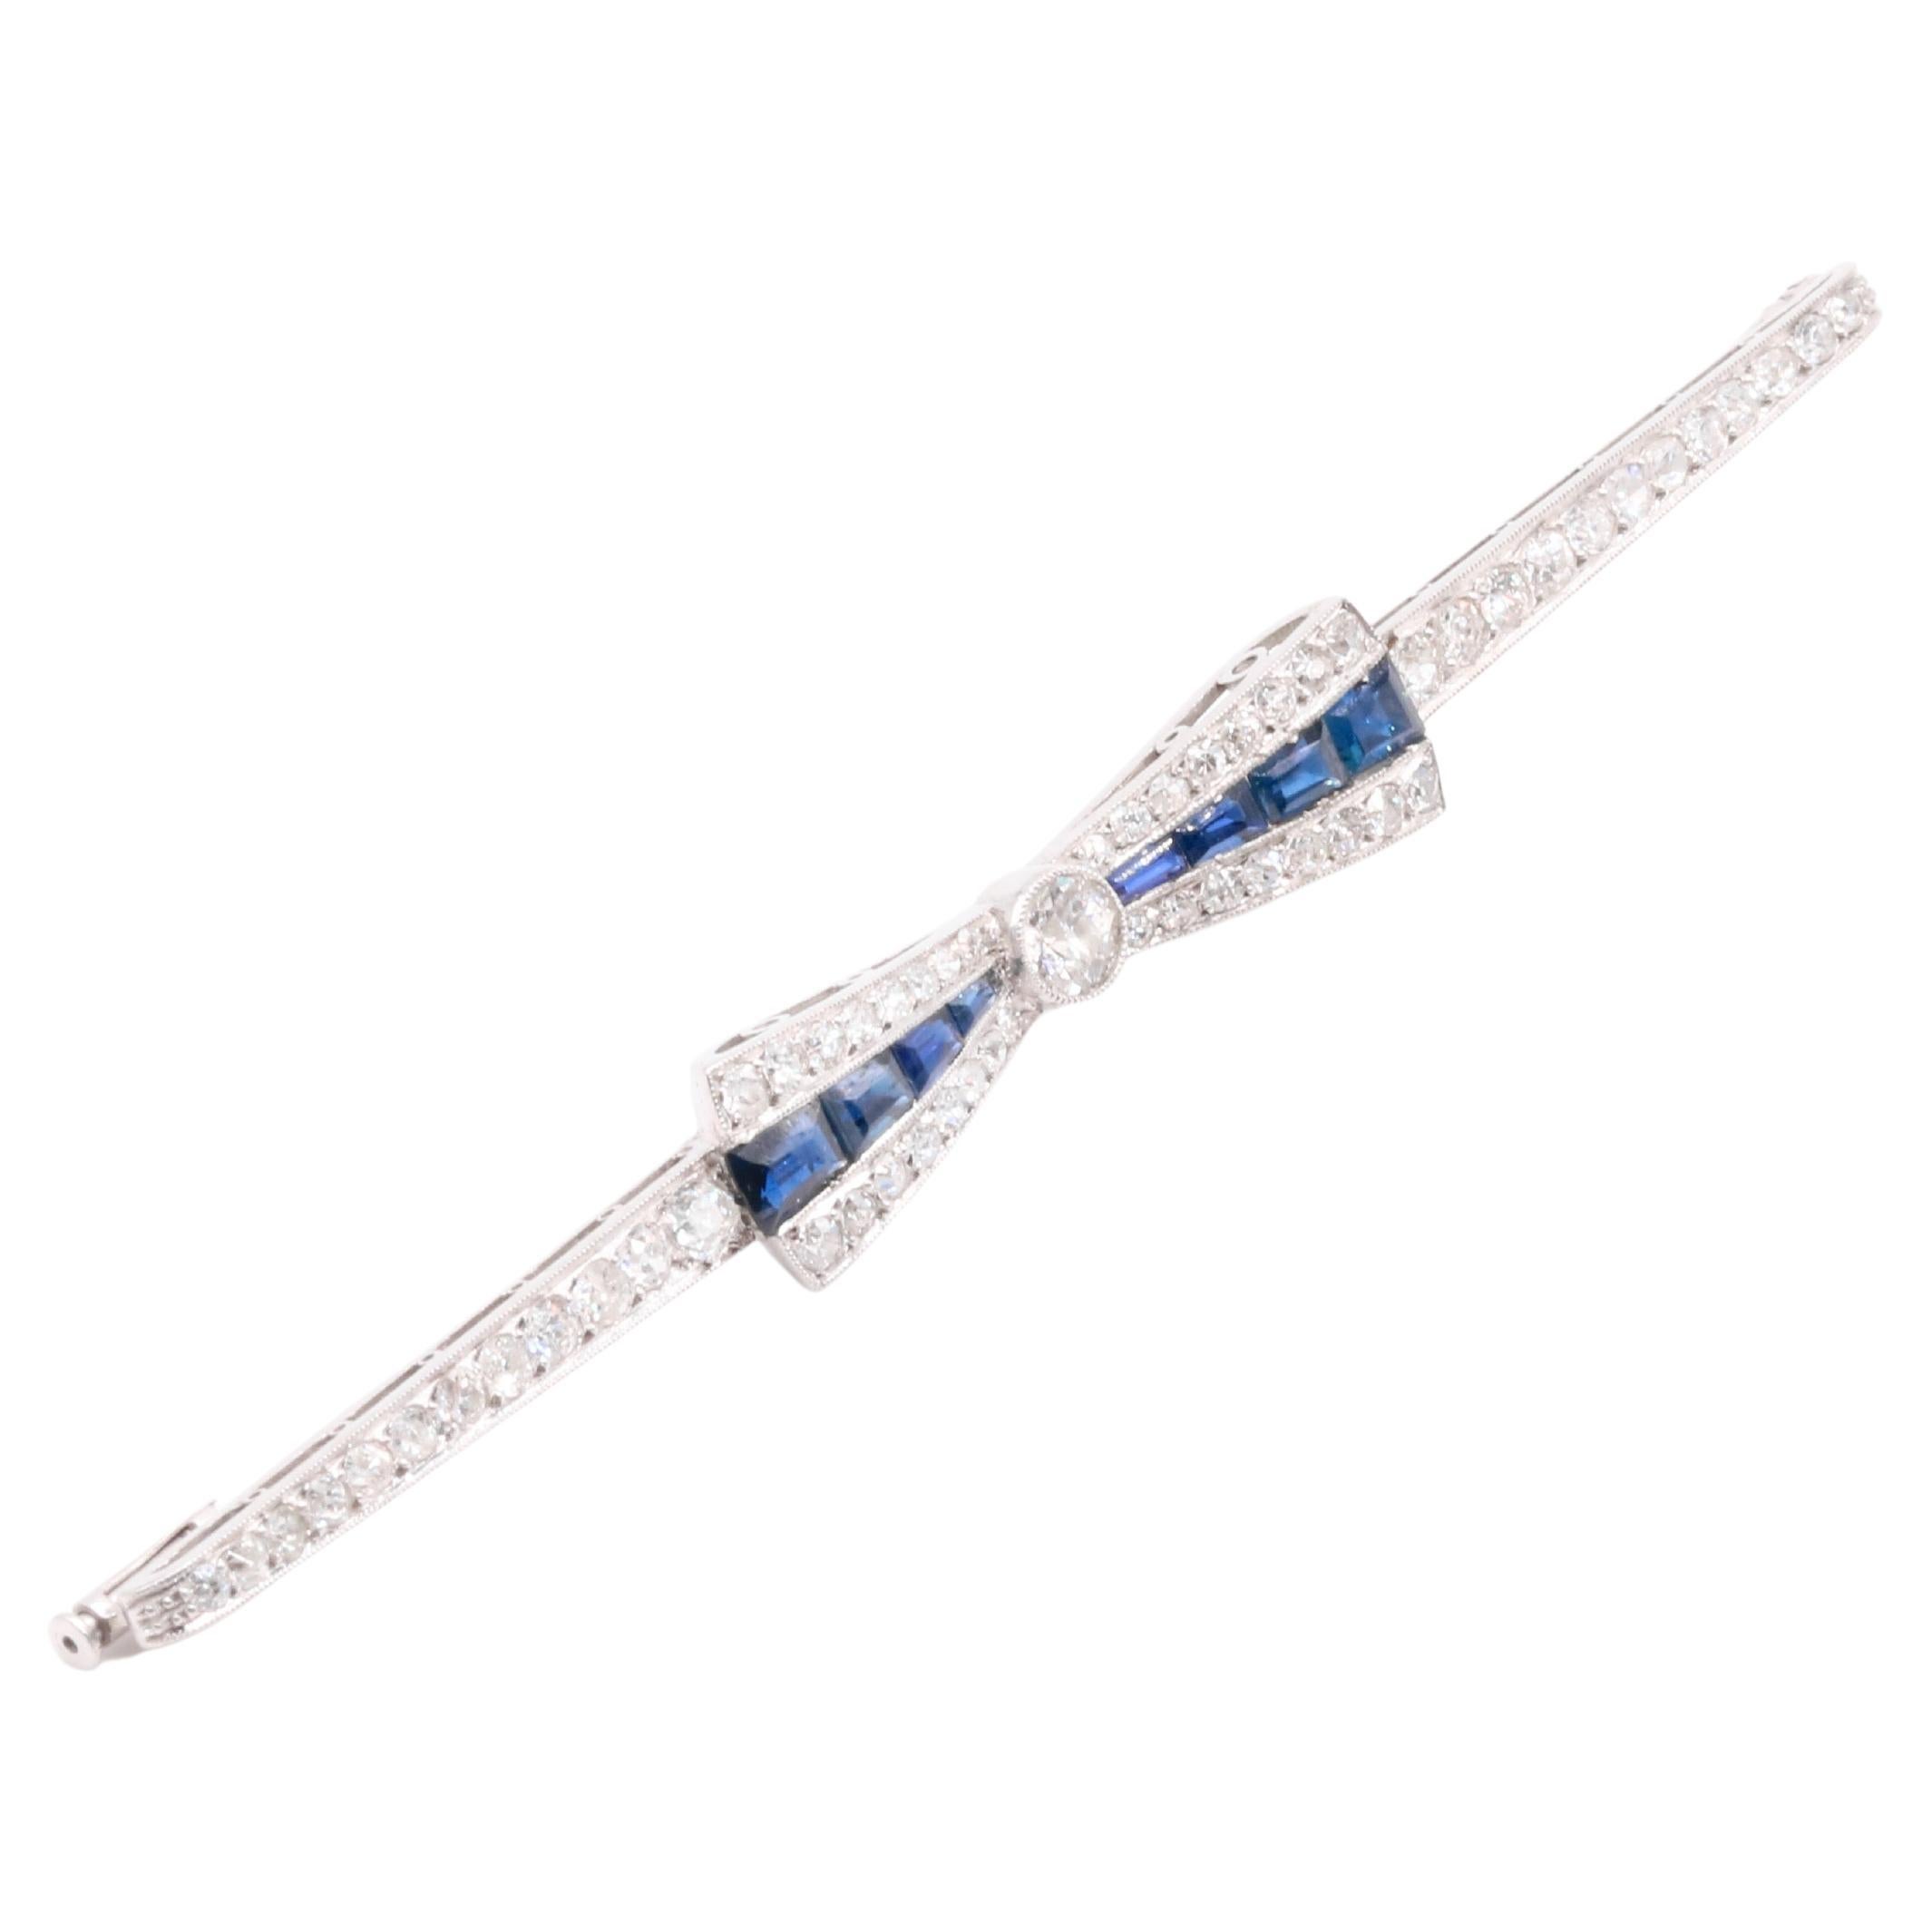 French Art Deco 1920s Platinum 2.88tgw Sapphire and Old Cut Diamond Bow Brooch